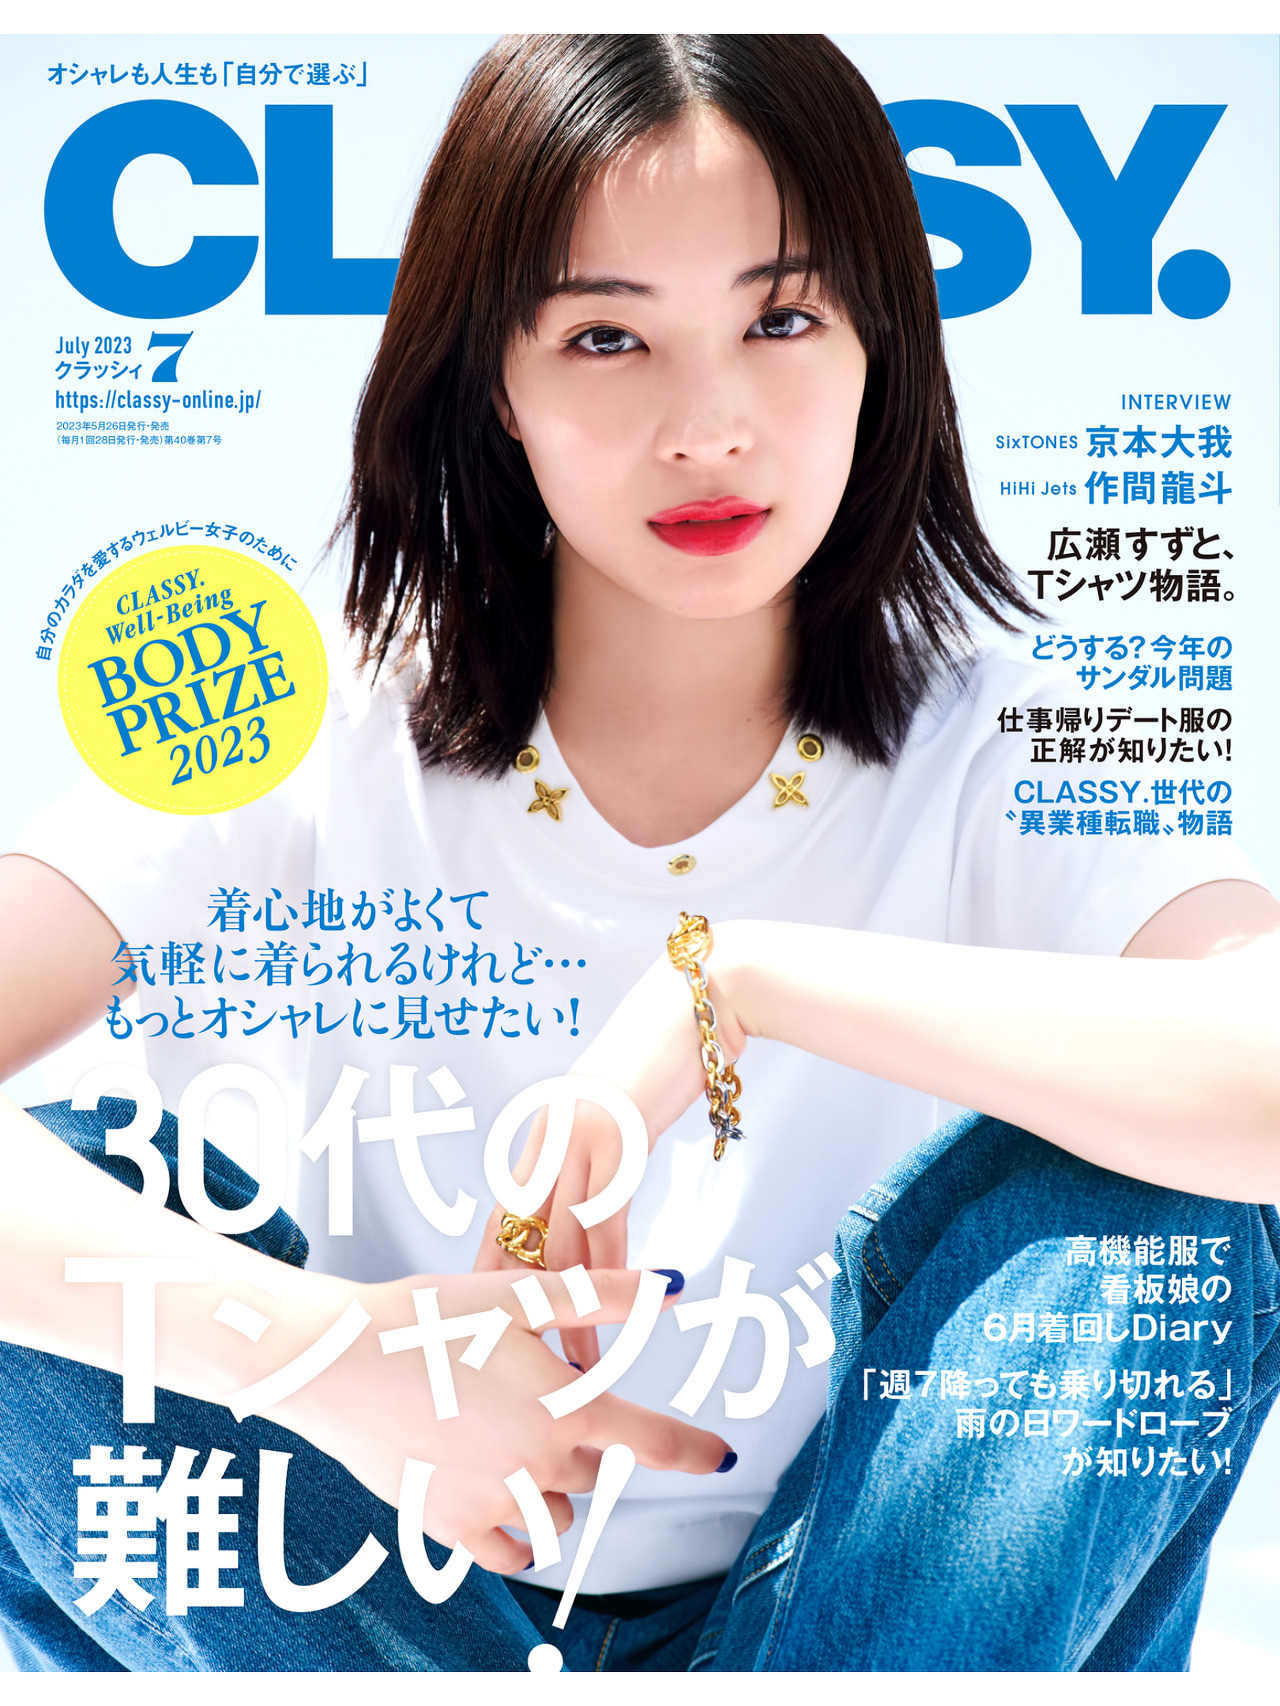 Actor Hirosez CLASSY July 2023 issue MORE July 2023 issue